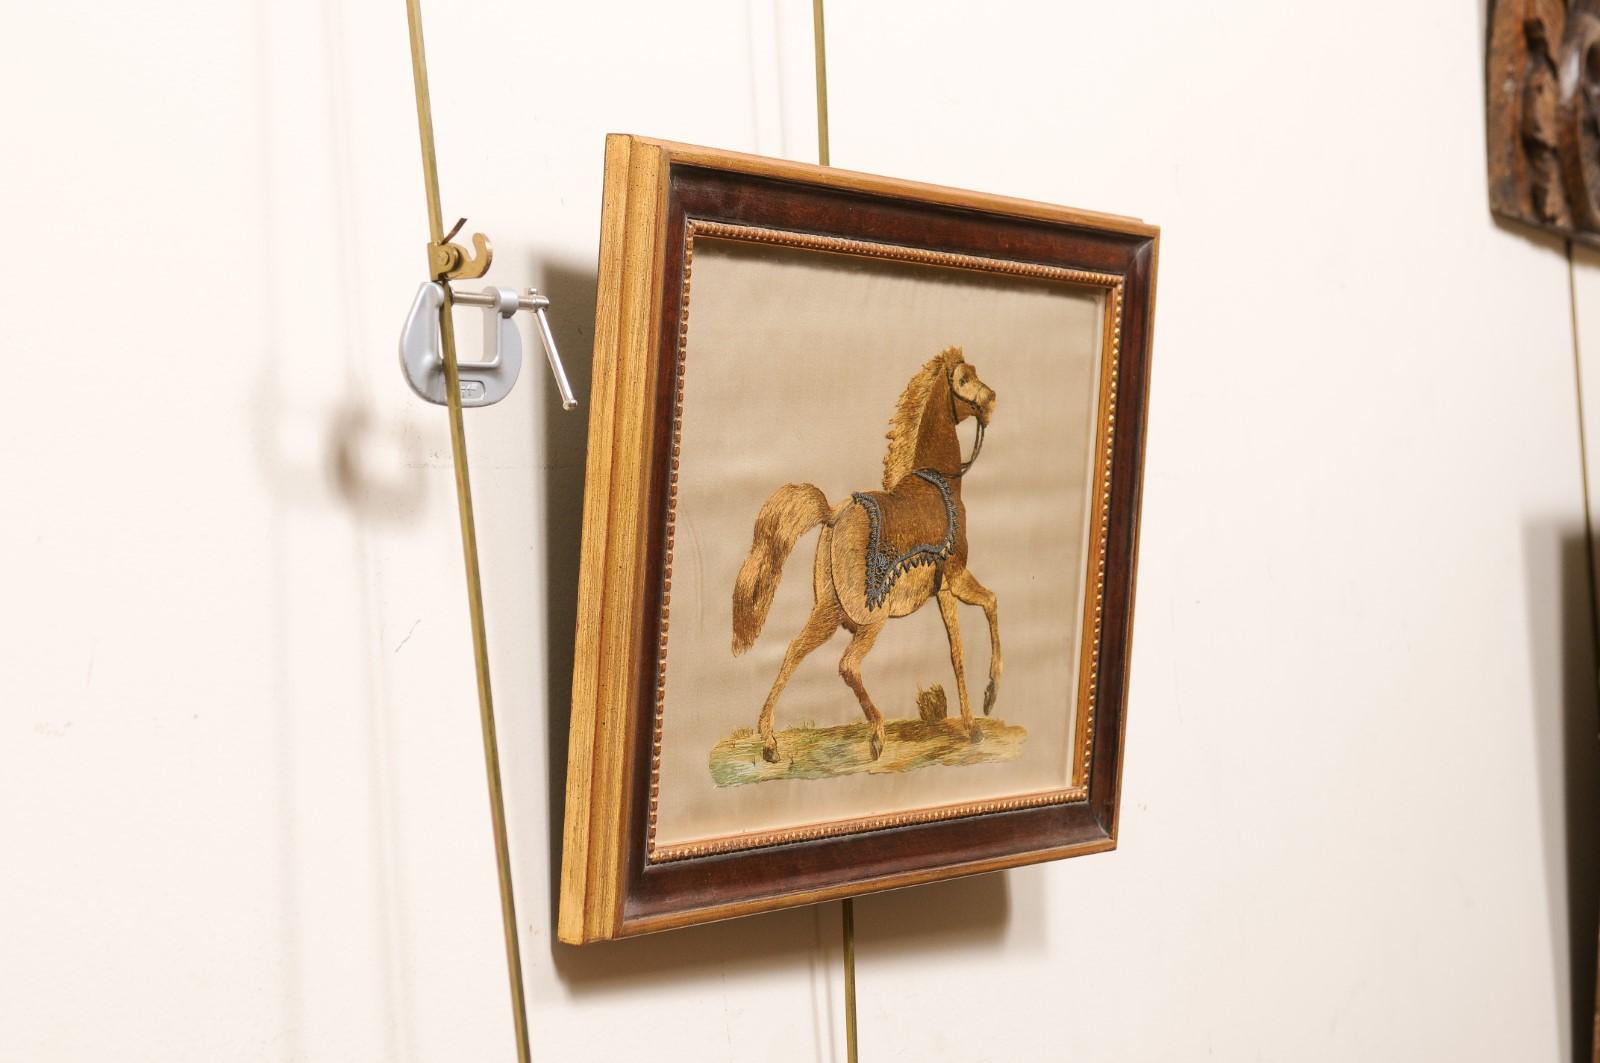 String Framed 19th Century Silk Embroidery of Horse For Sale